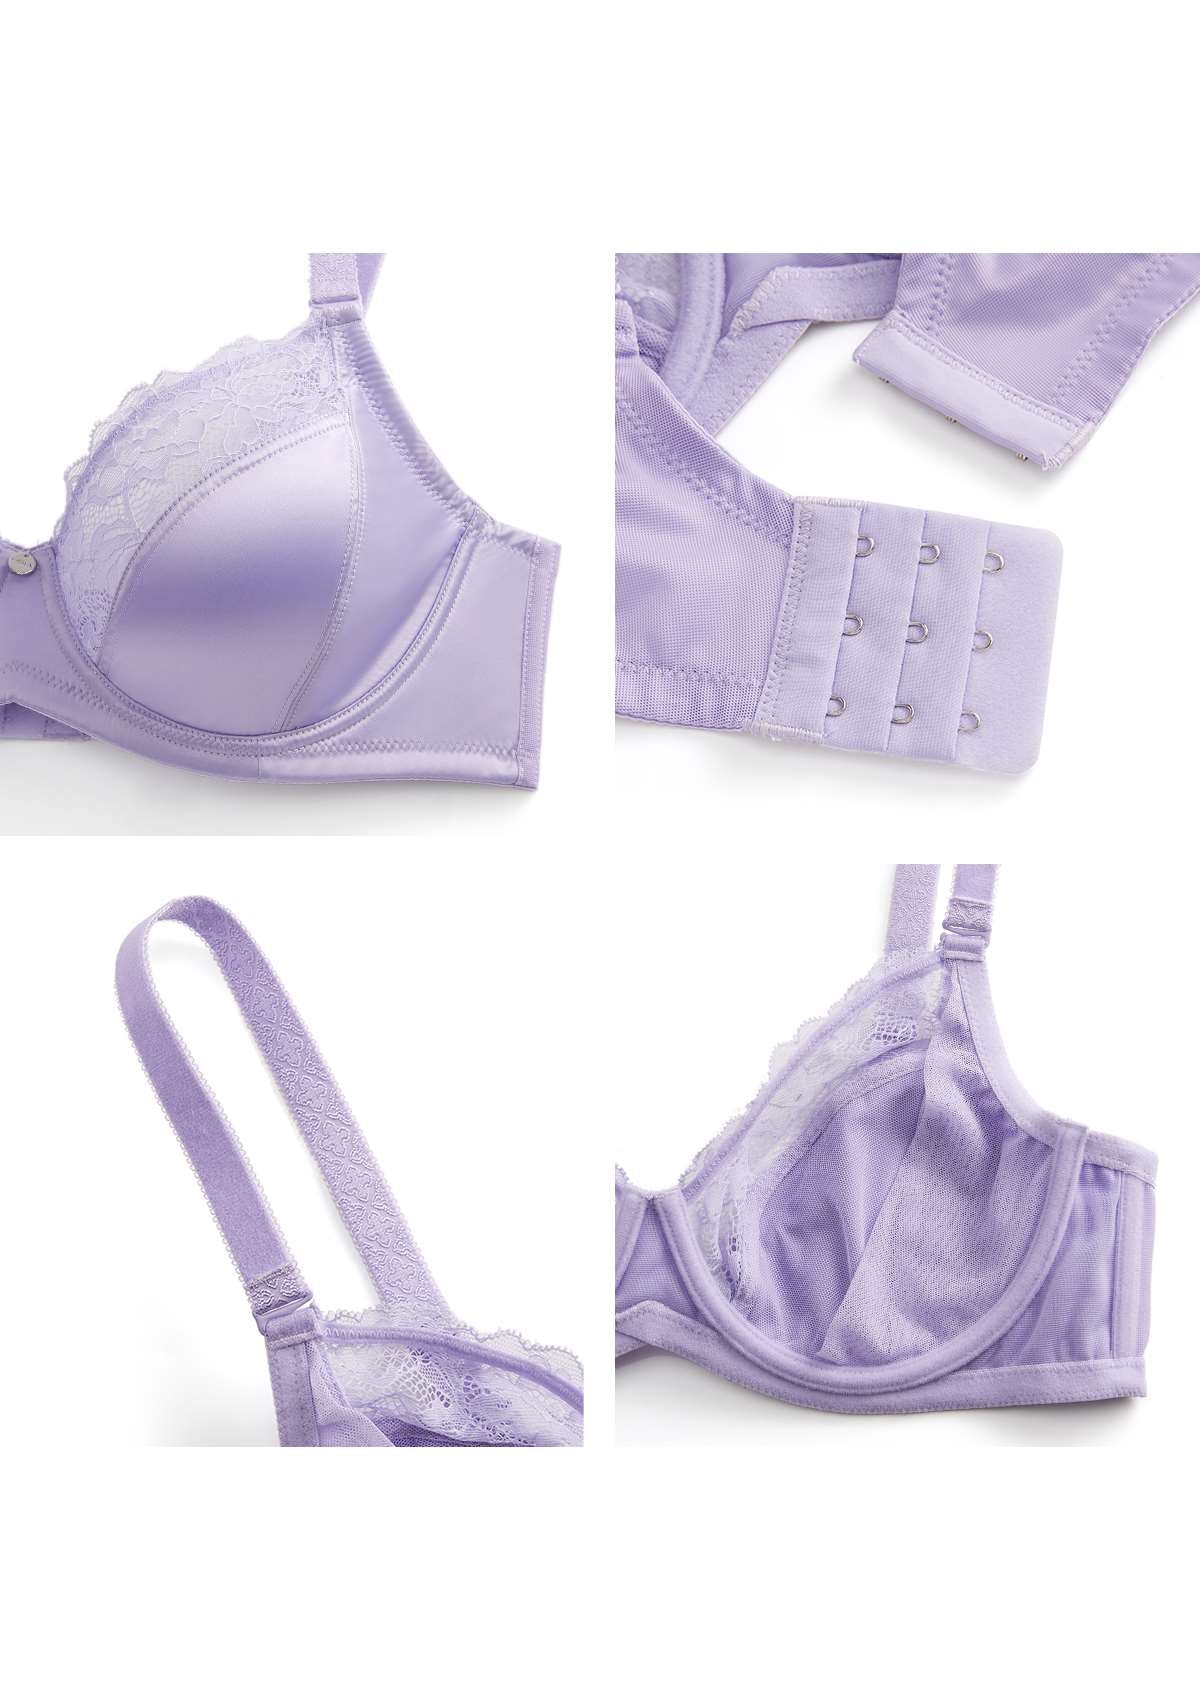 HSIA Foxy Satin Smooth Floral Lace Full Coverage Underwire Bra Set - Purple / 38 / D